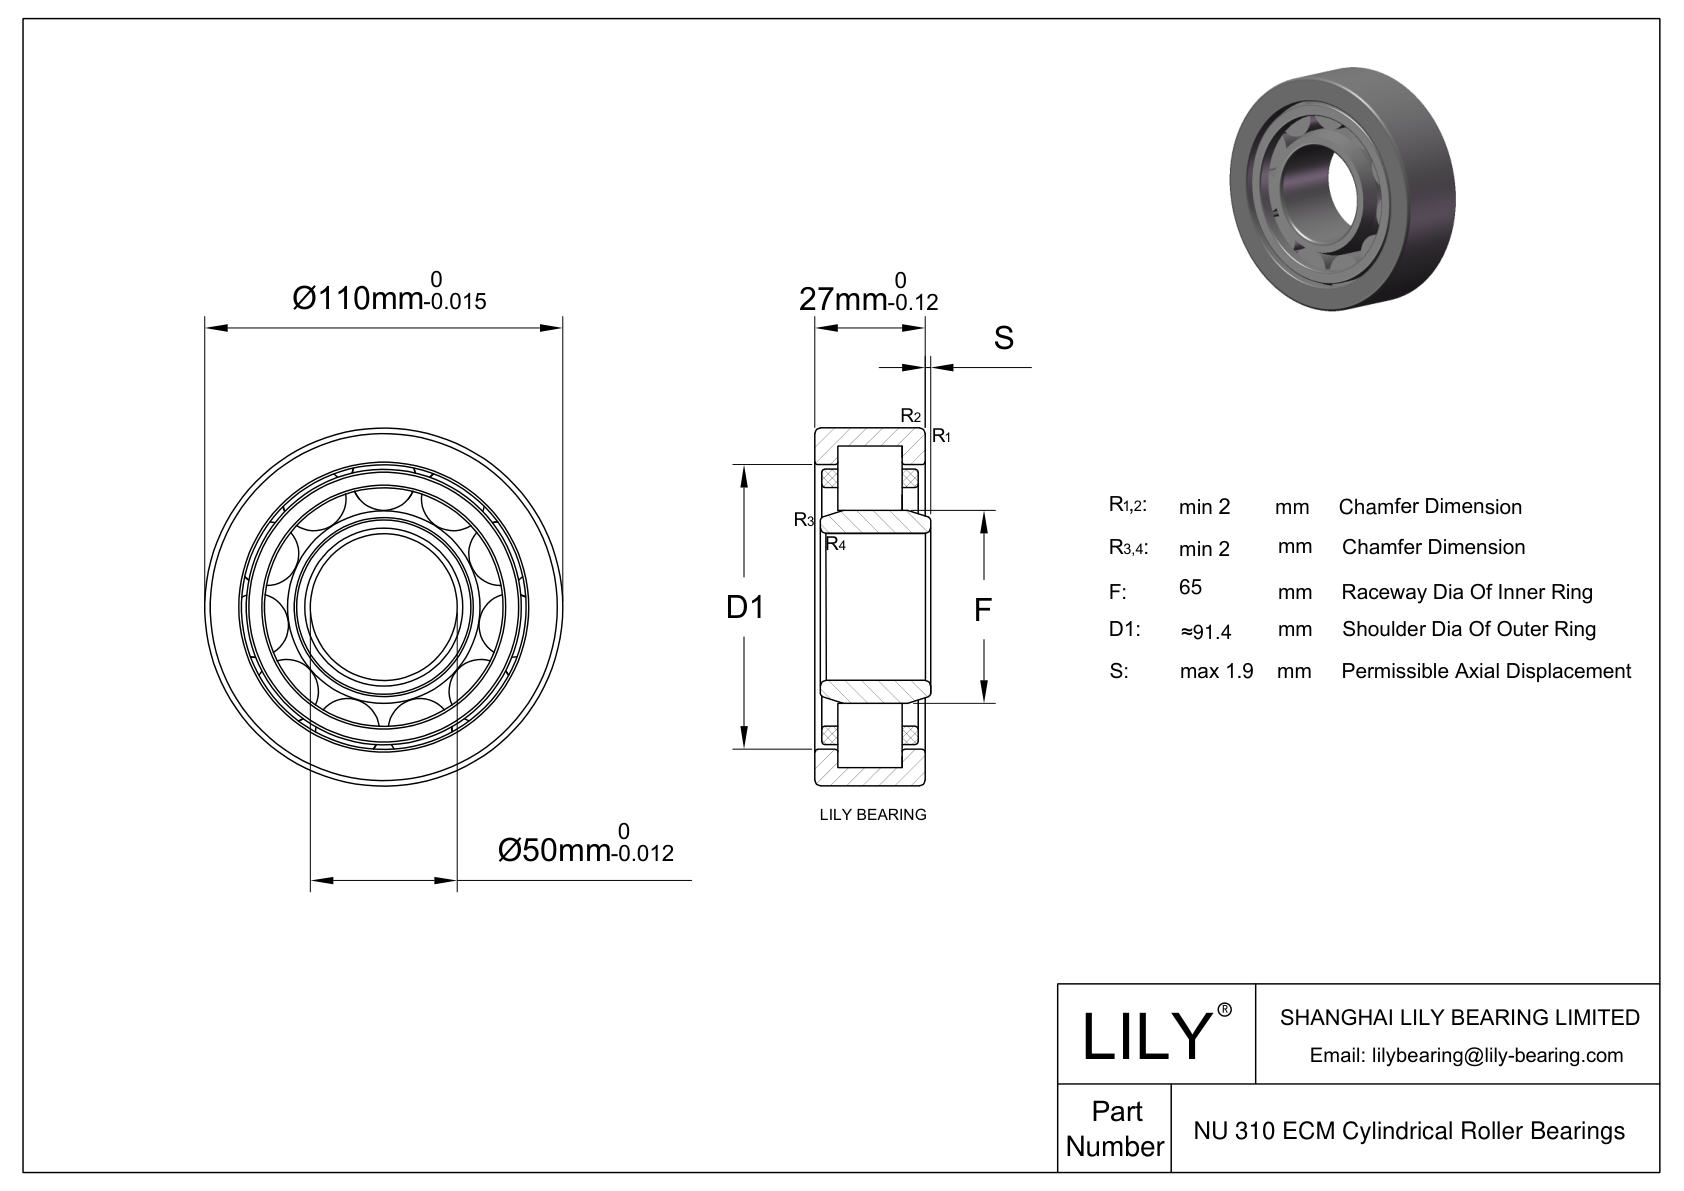 NU 310 ECM/C3VL0241 Ceramic Coated Cylindrical Roller Bearings cad drawing